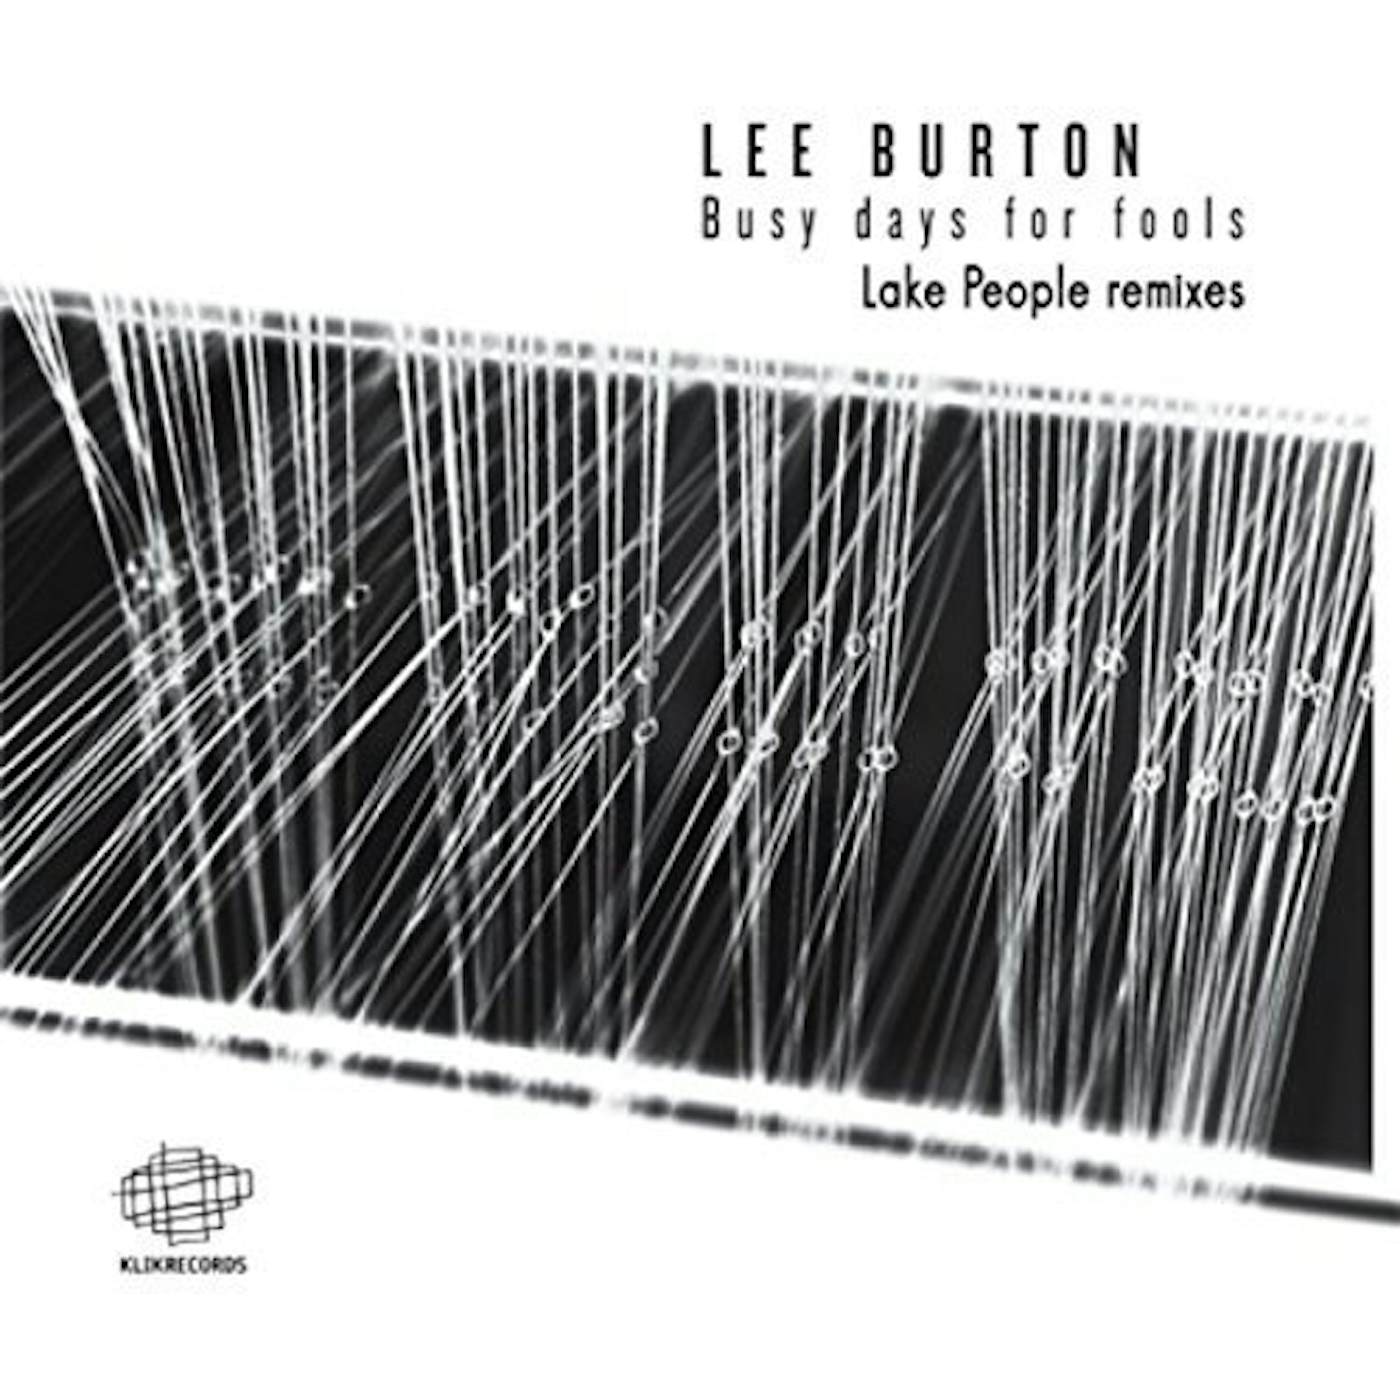 Lee Burton BUSY DAYS FOR FOOLS (LAKE PEOPLE REMIXES) Vinyl Record